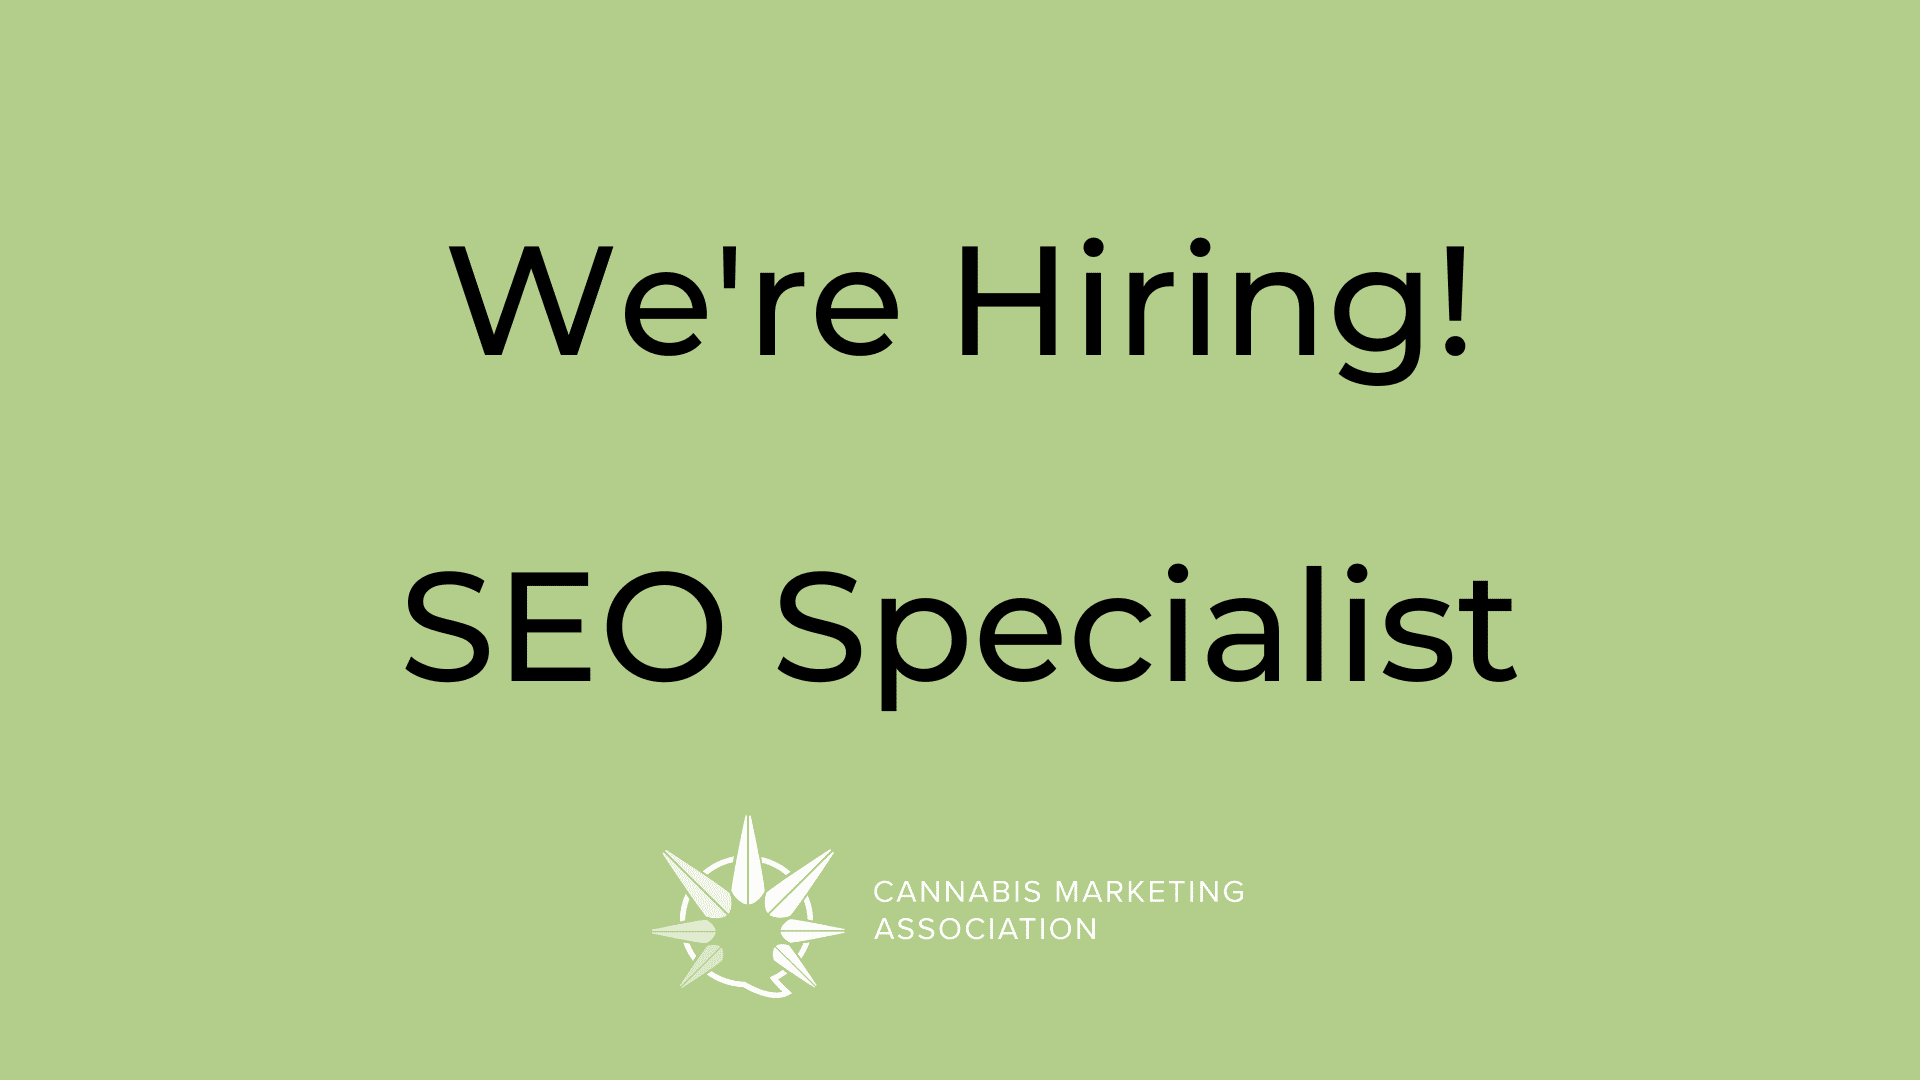 black text on green background that says we're hiring! seo specialist with white cma logo below